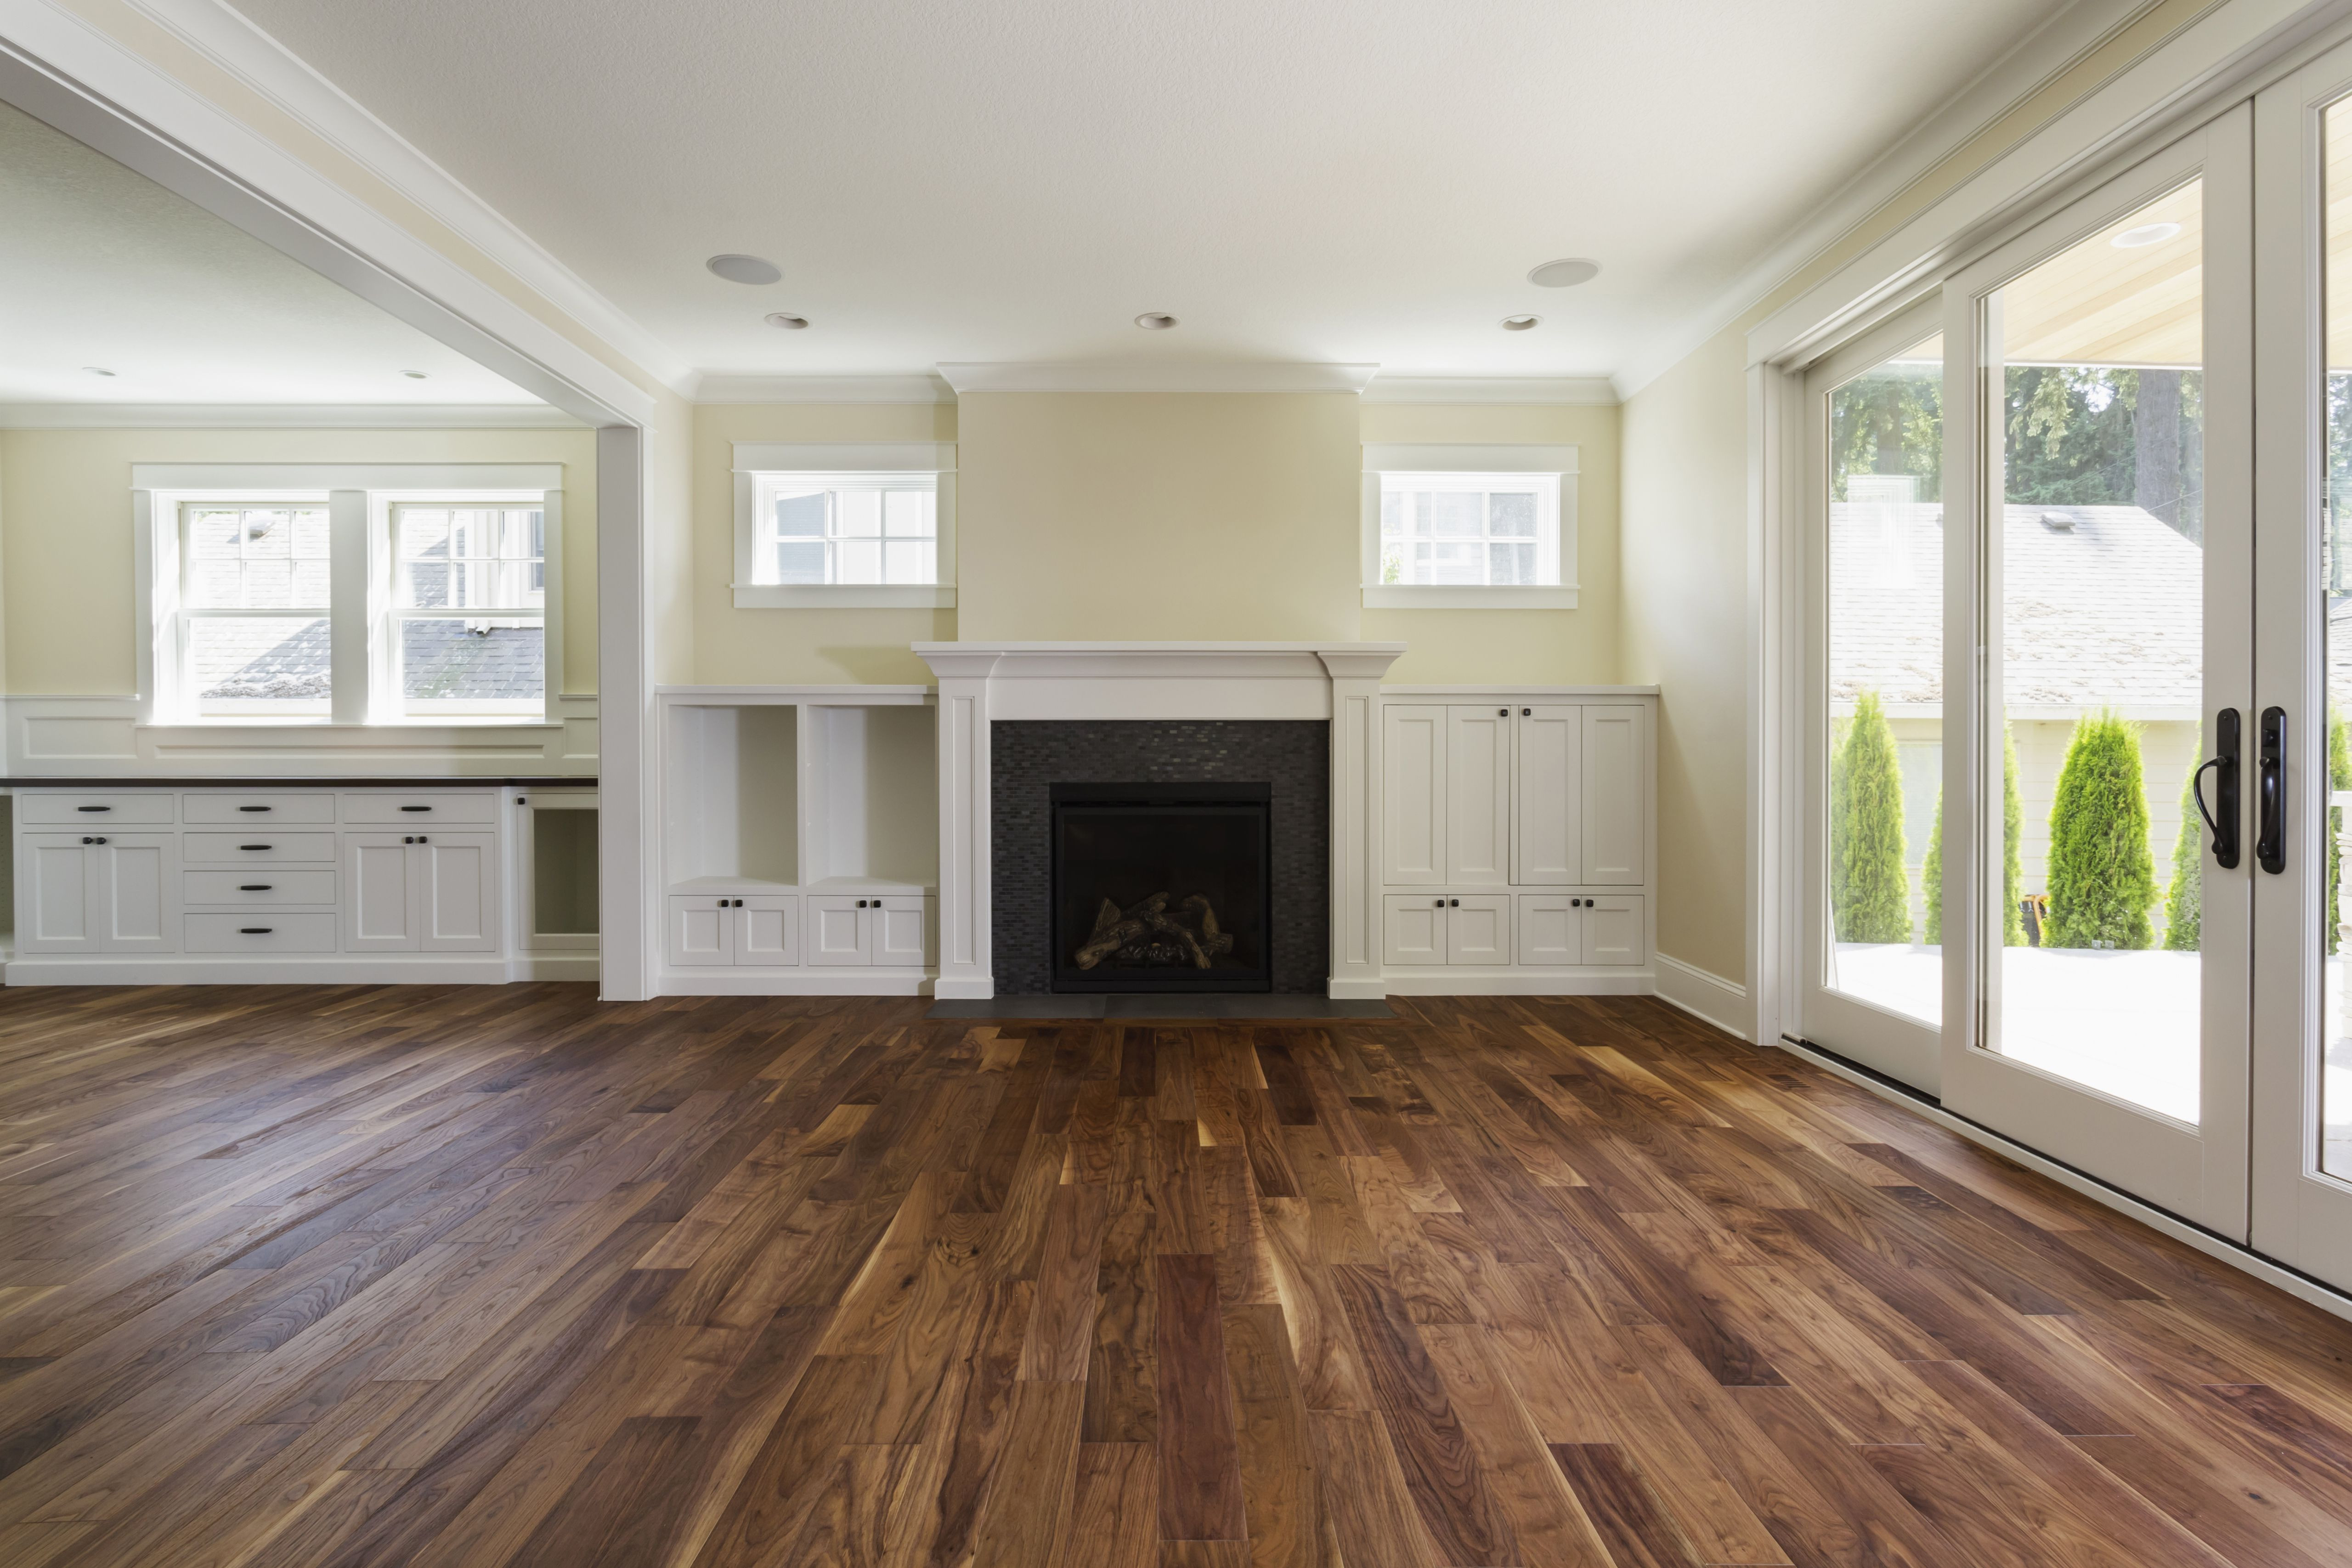 25 Amazing Best Way to Fill Gaps In Hardwood Floors 2024 free download best way to fill gaps in hardwood floors of the pros and cons of prefinished hardwood flooring intended for fireplace and built in shelves in living room 482143011 57bef8e33df78cc16e035397